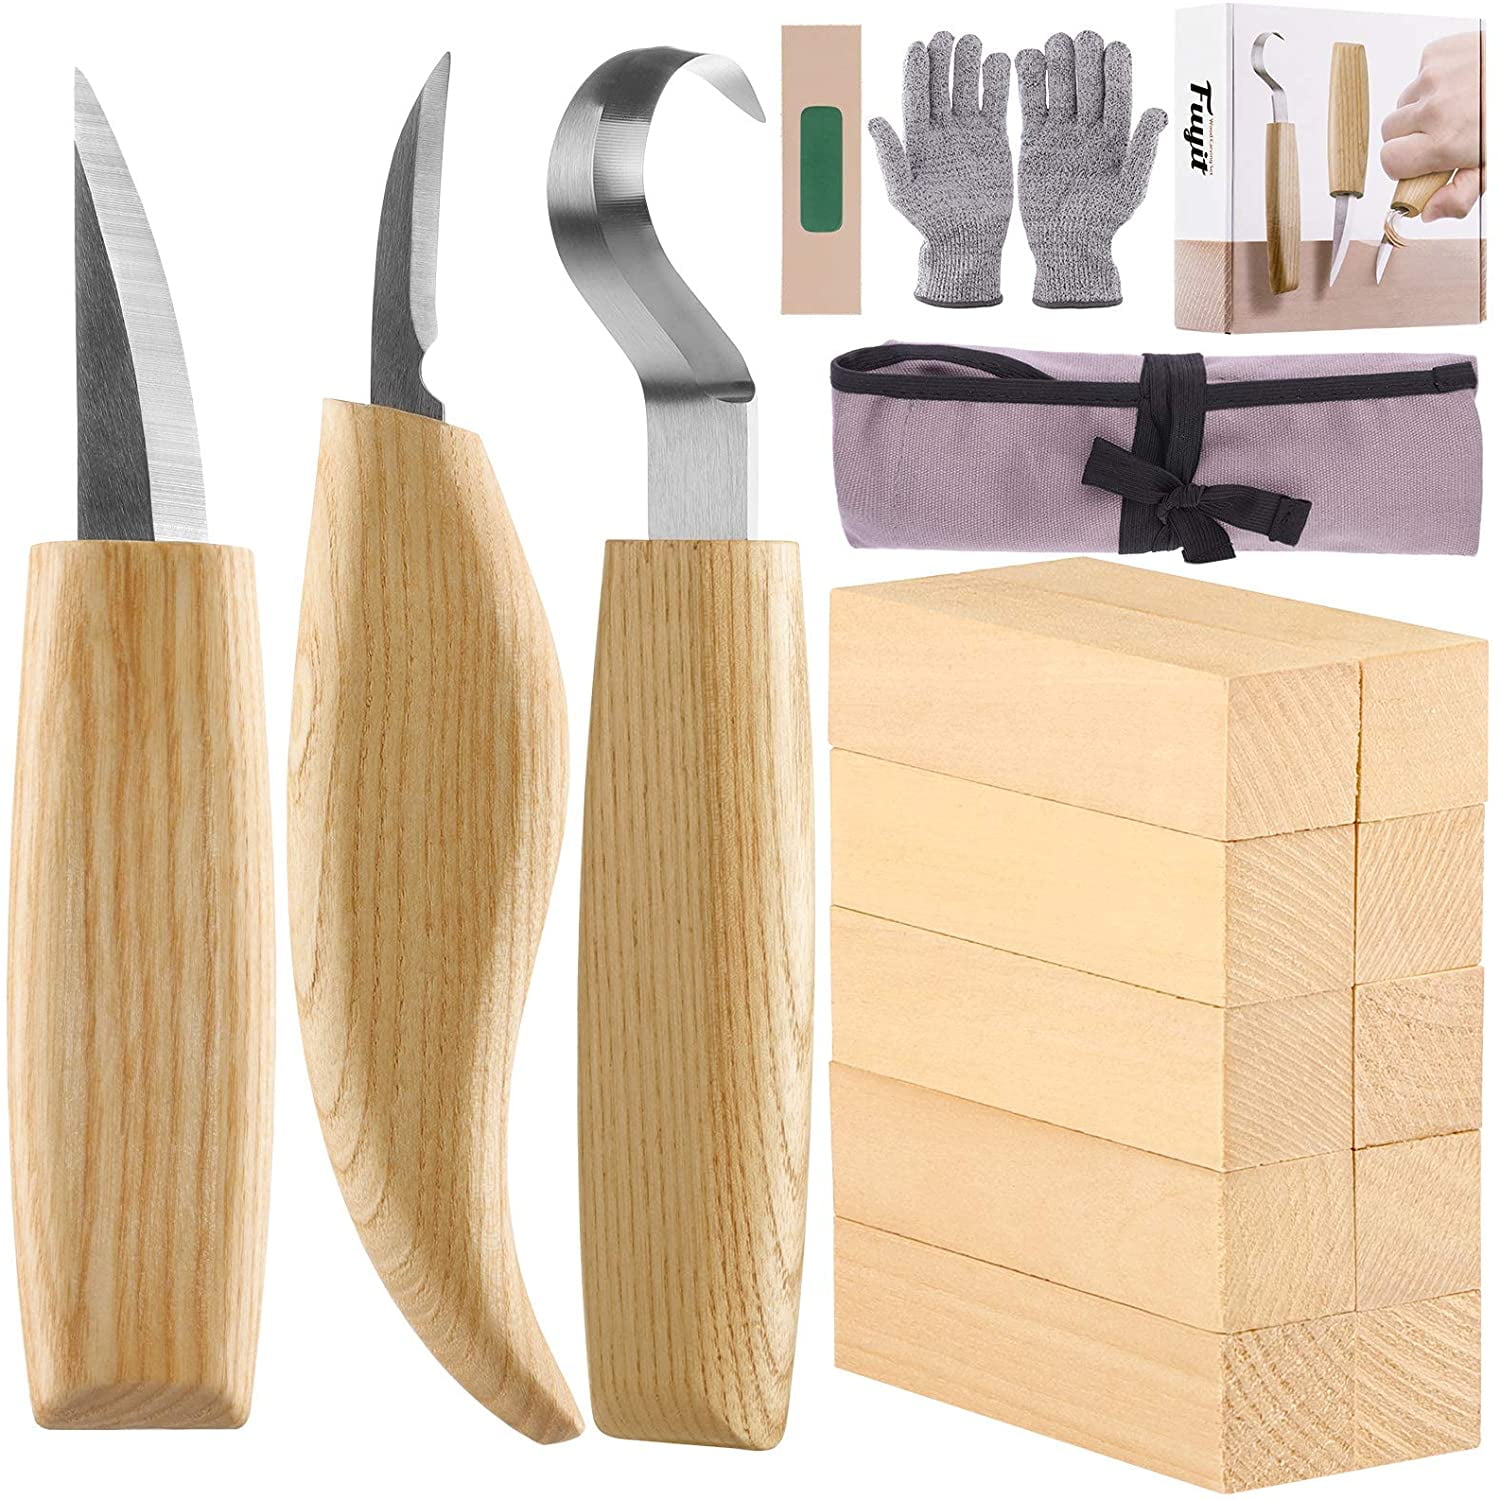 Upgrade 38 Pcs Wood Carving Kit,Wood Carving Tool, Wood Carving Knife Set & Electric Polishing Machine,Including Tool Box,for Beginner and Carpenter